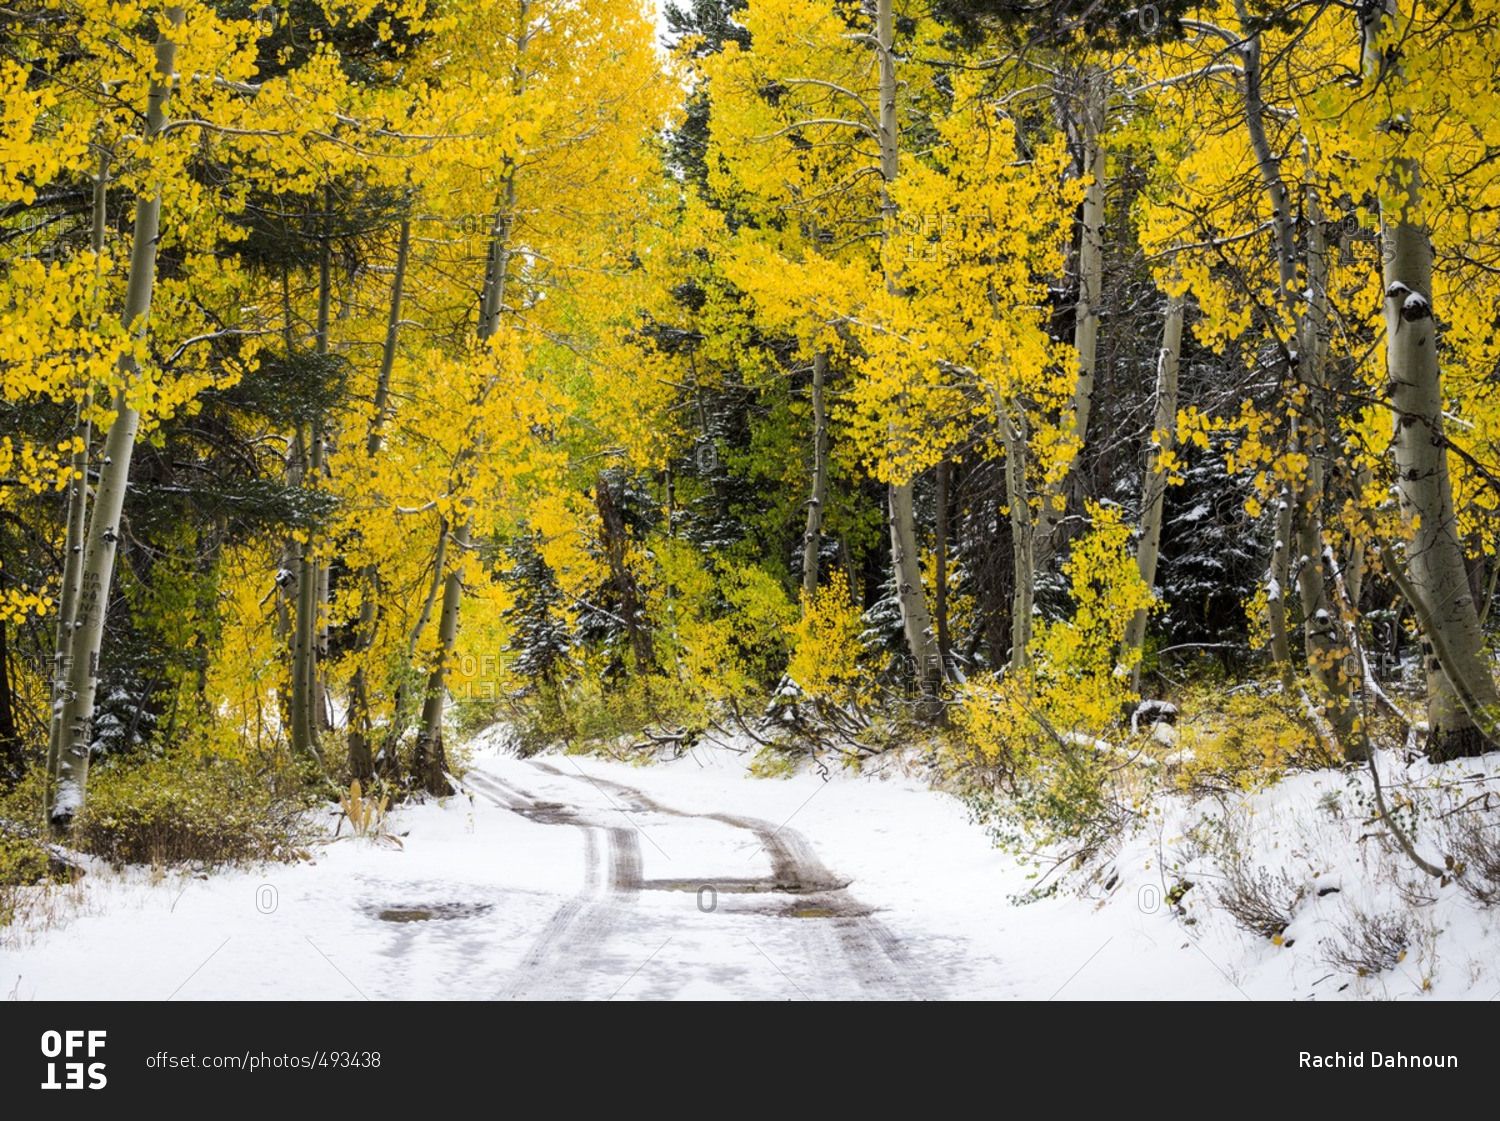 Tire tracks lead down a snowy road through an aspen grove illuminated with fall color in Hope Valley, California